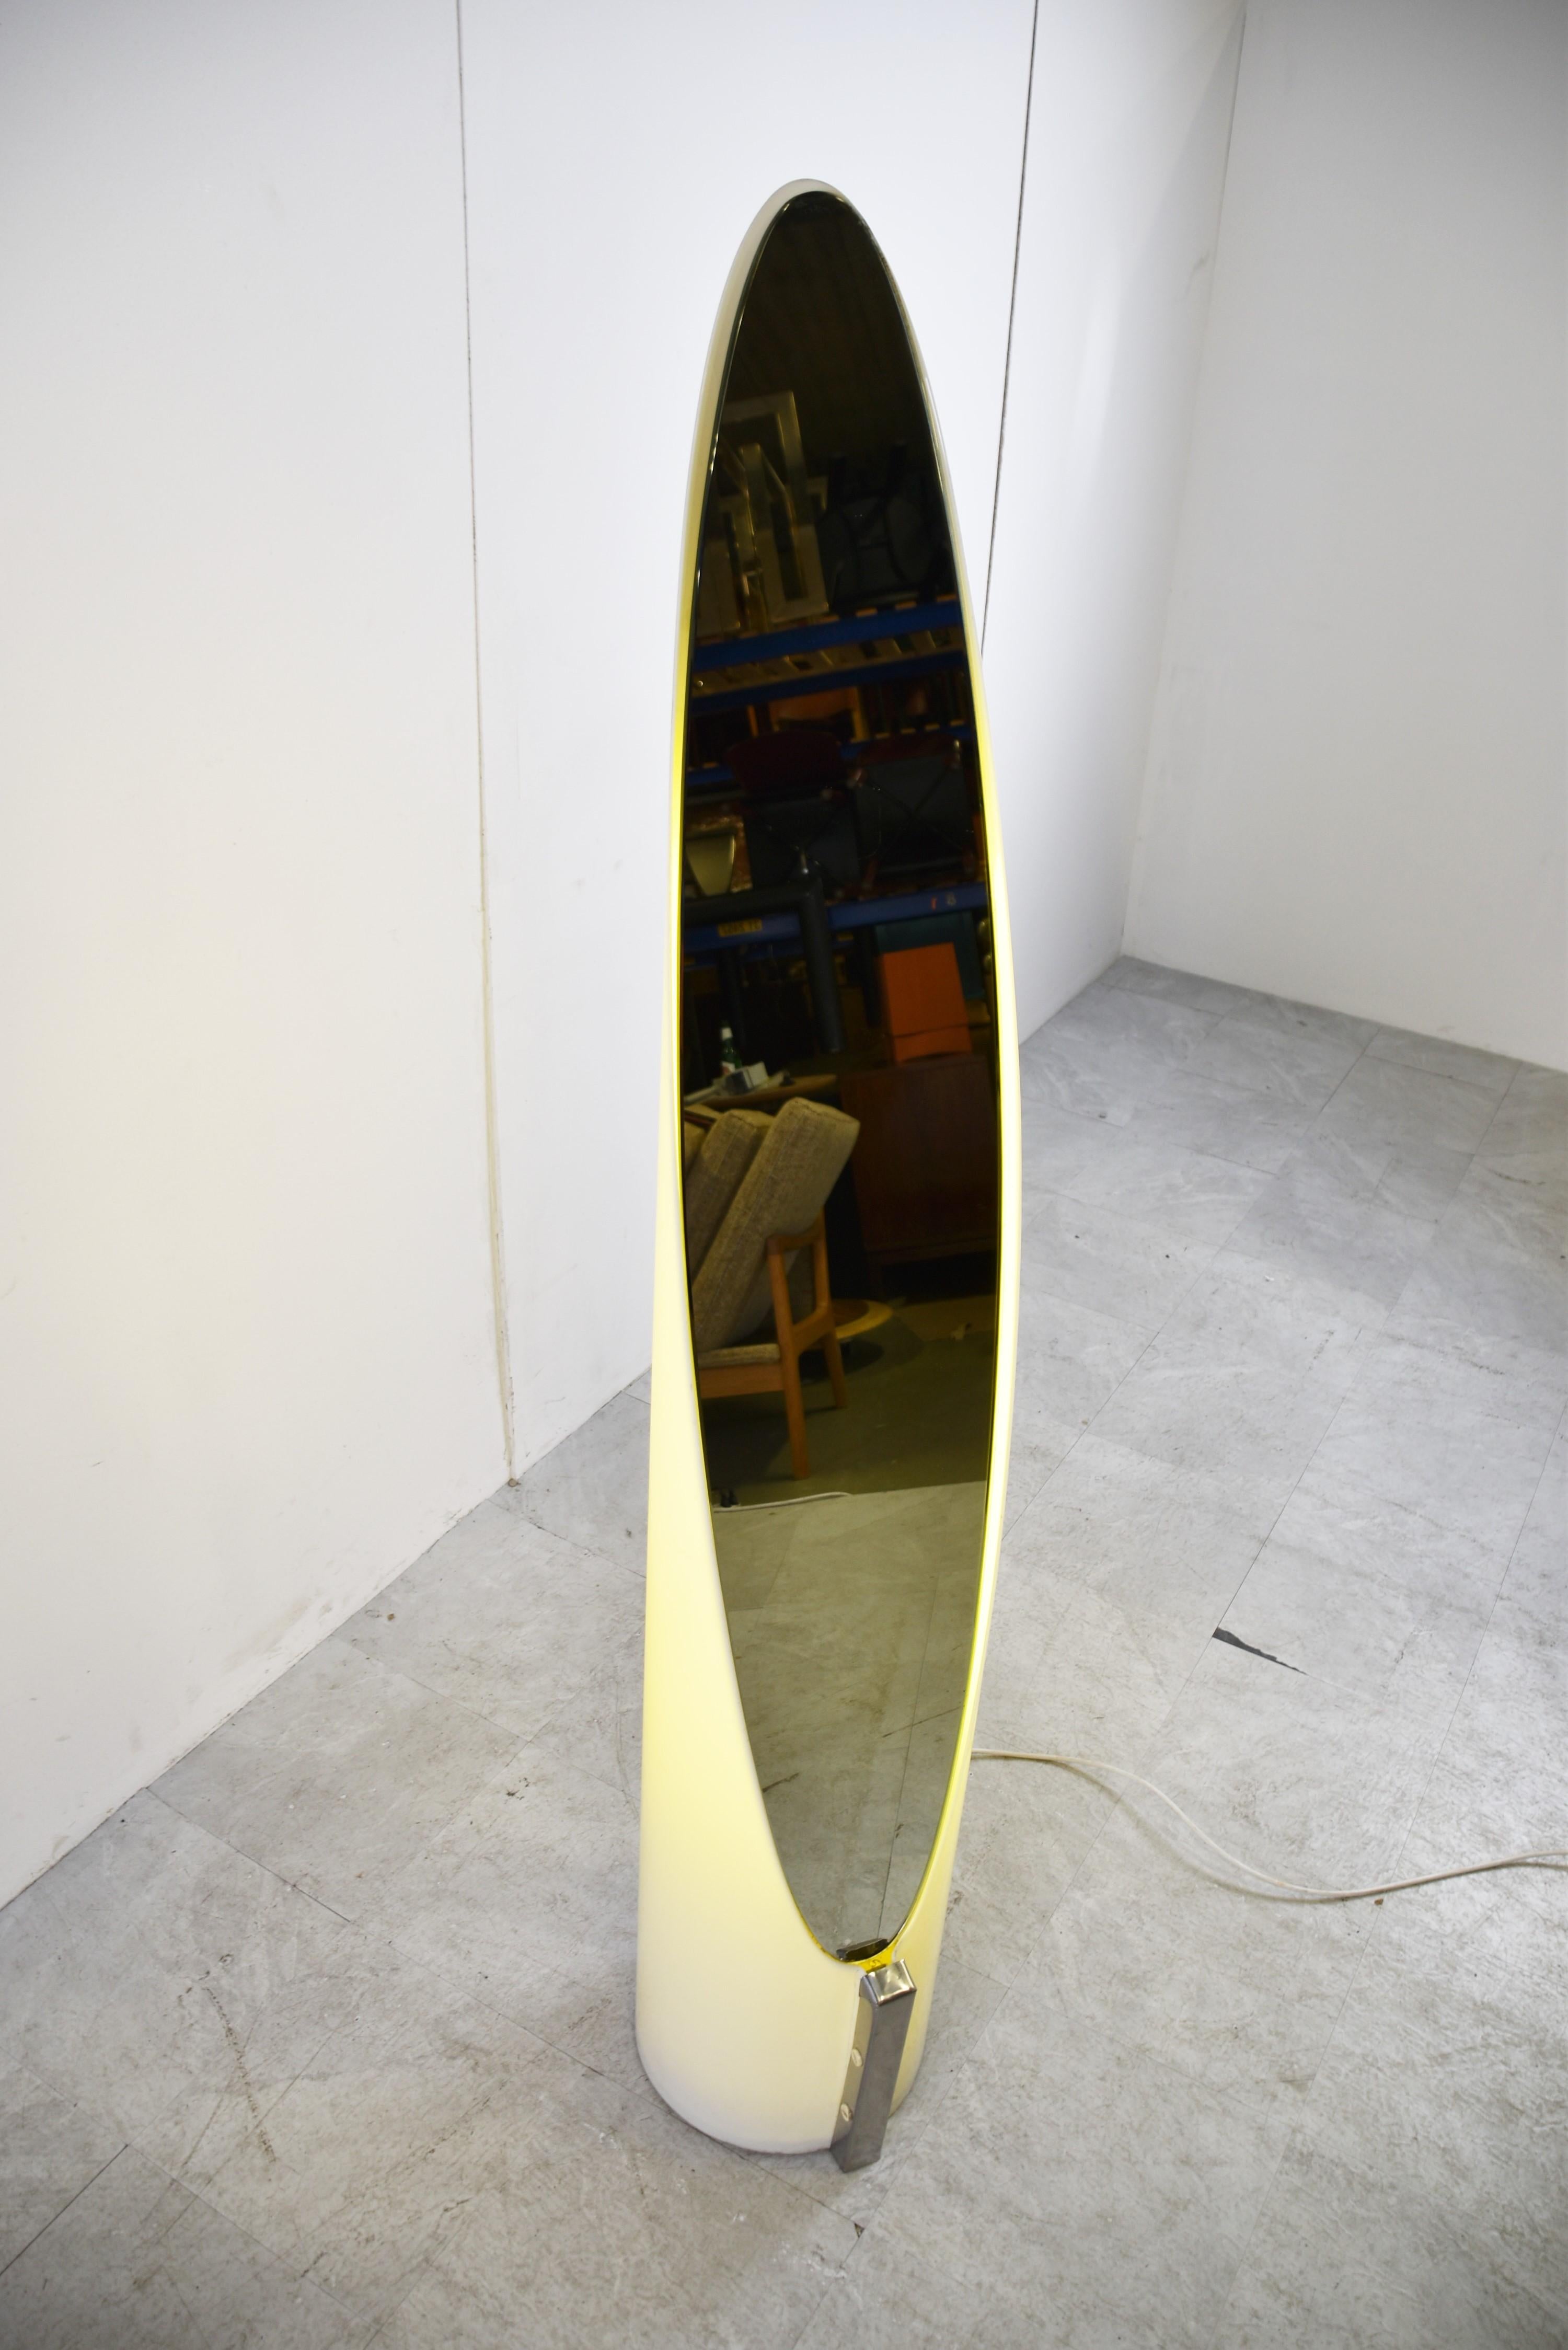 Vintage unghia ('nail' in italian) floor mirror, rare illuminated model.

The light inside the mirror gives a great effect.

1970s - Italy

Dimensions:
Height: 160cm/62.99